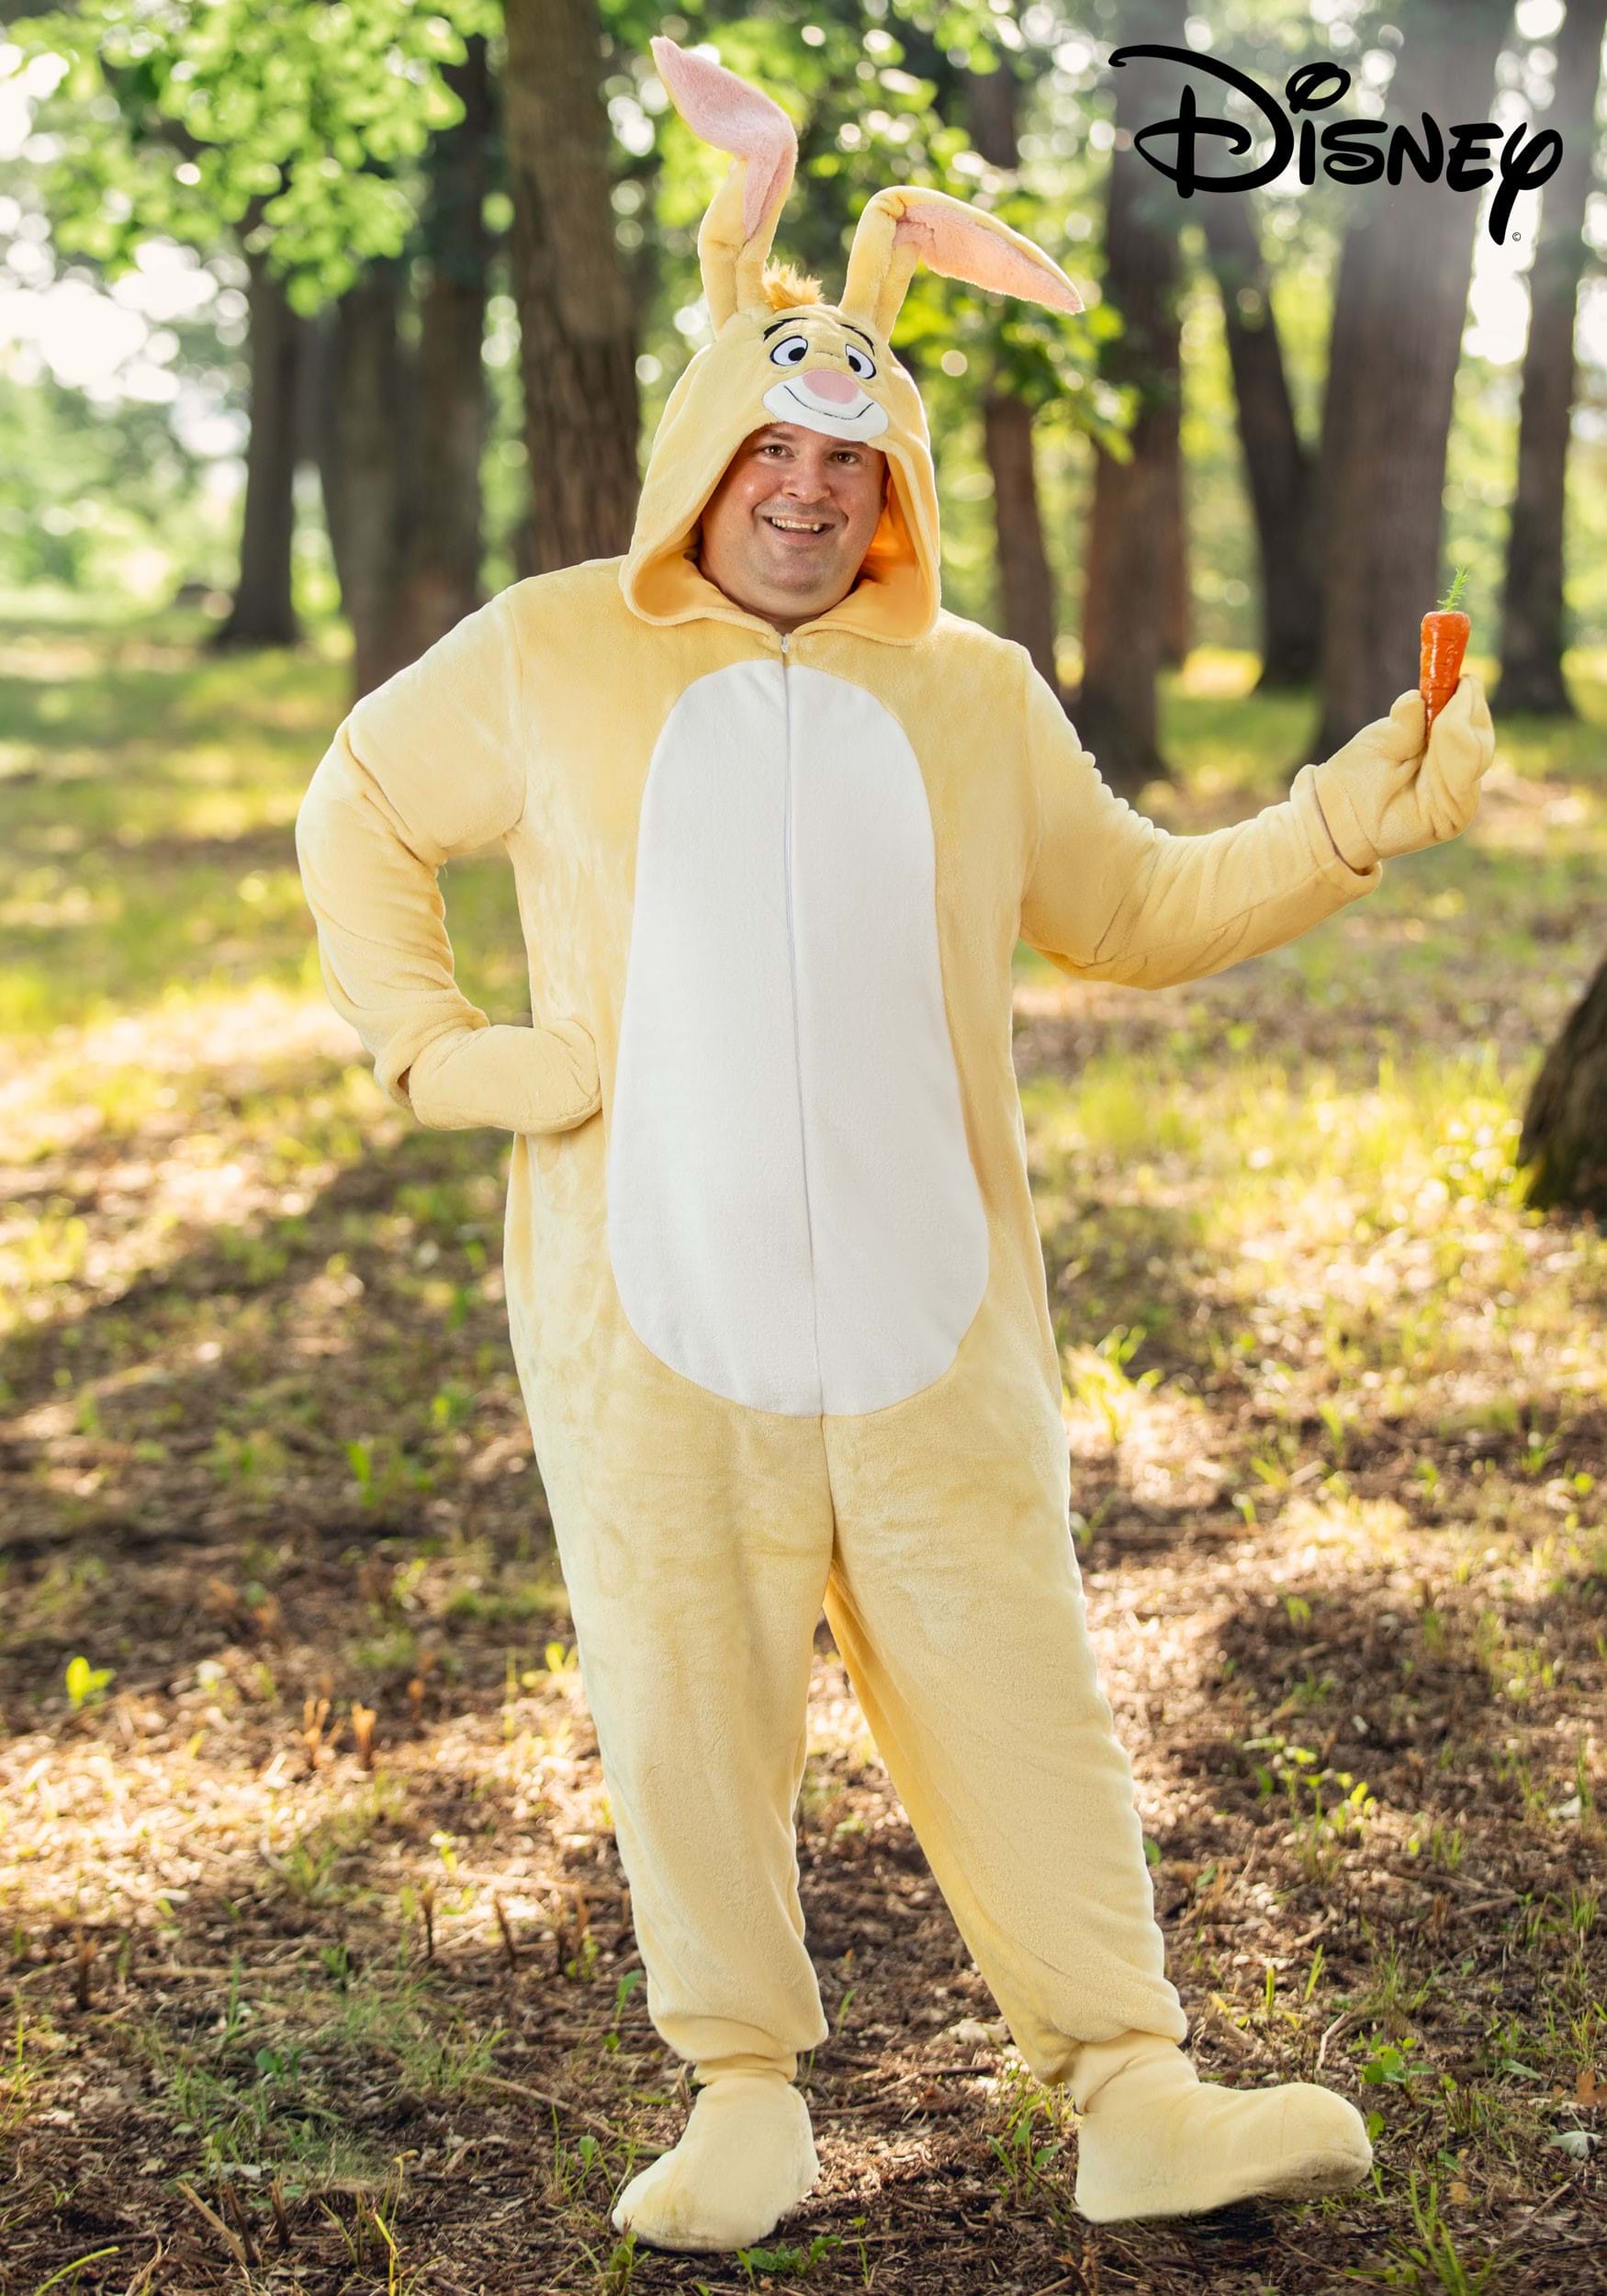 https://images.halloweencostumes.com/products/84557/1-1/plus-size-deluxe-disney-rabbit-costume-for-adults-update.jpg